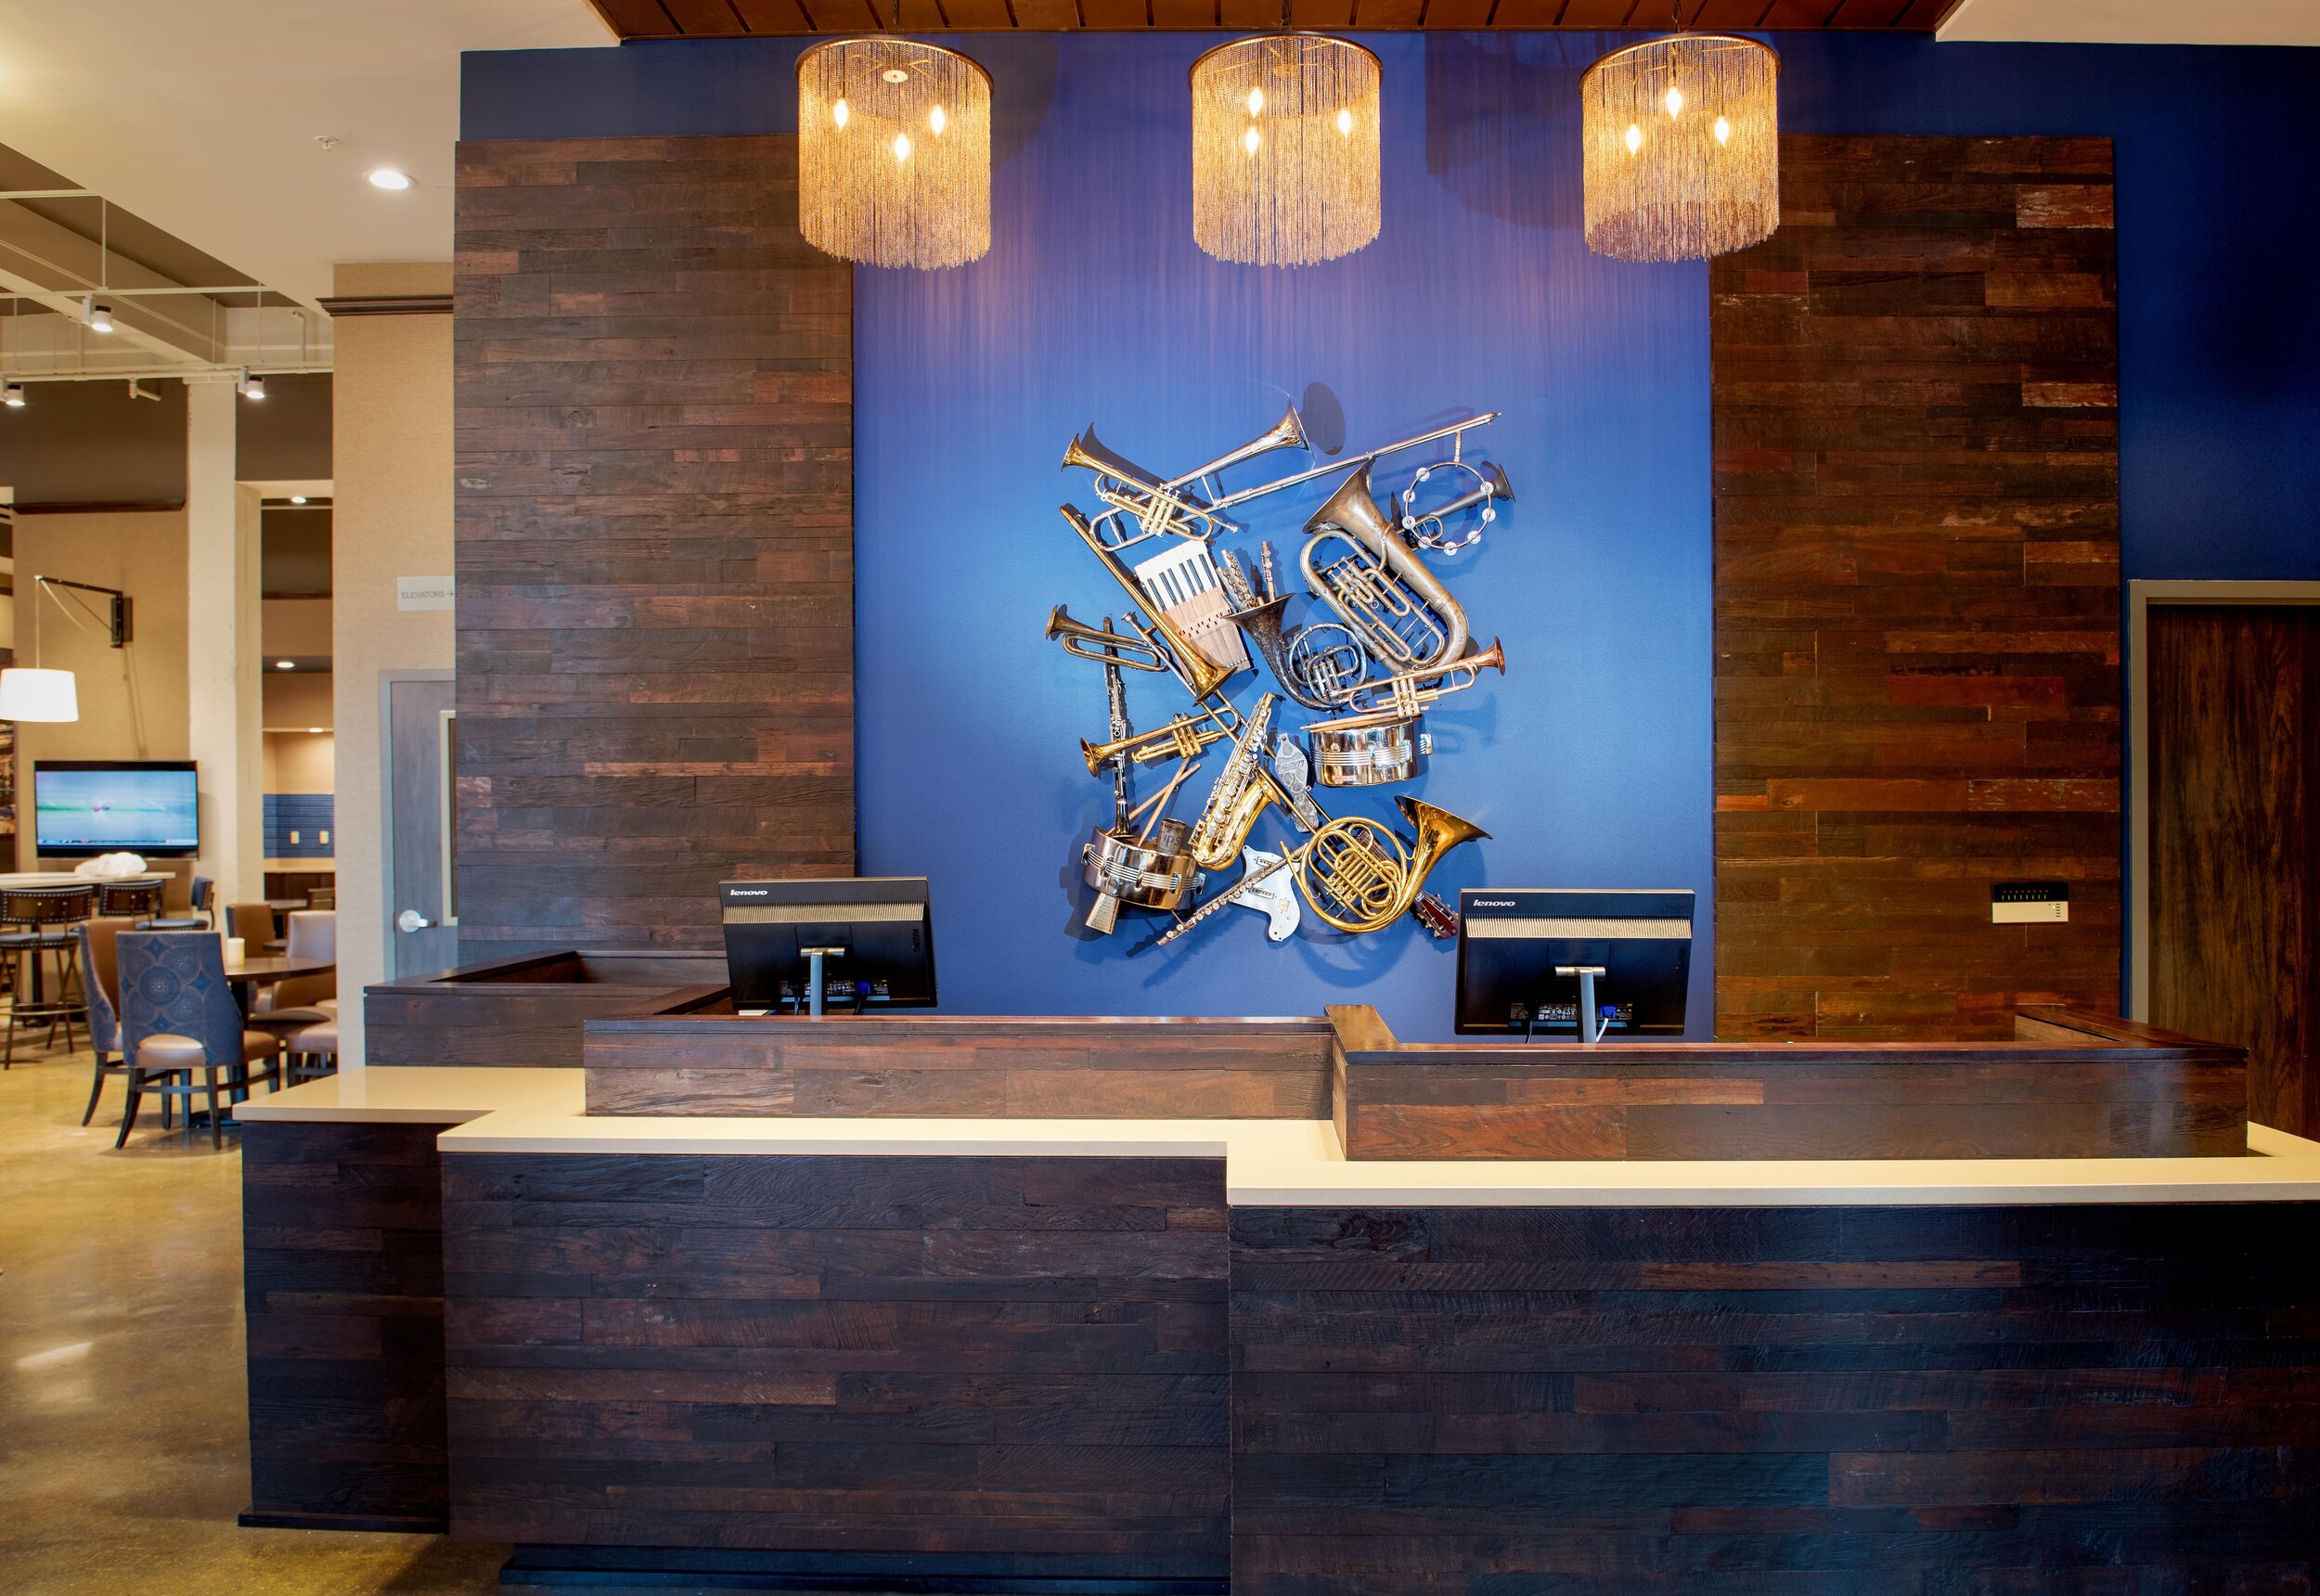 Fairfield Inn and Suites_New Orleans, LA_Campo Architects (5)-min.JPG